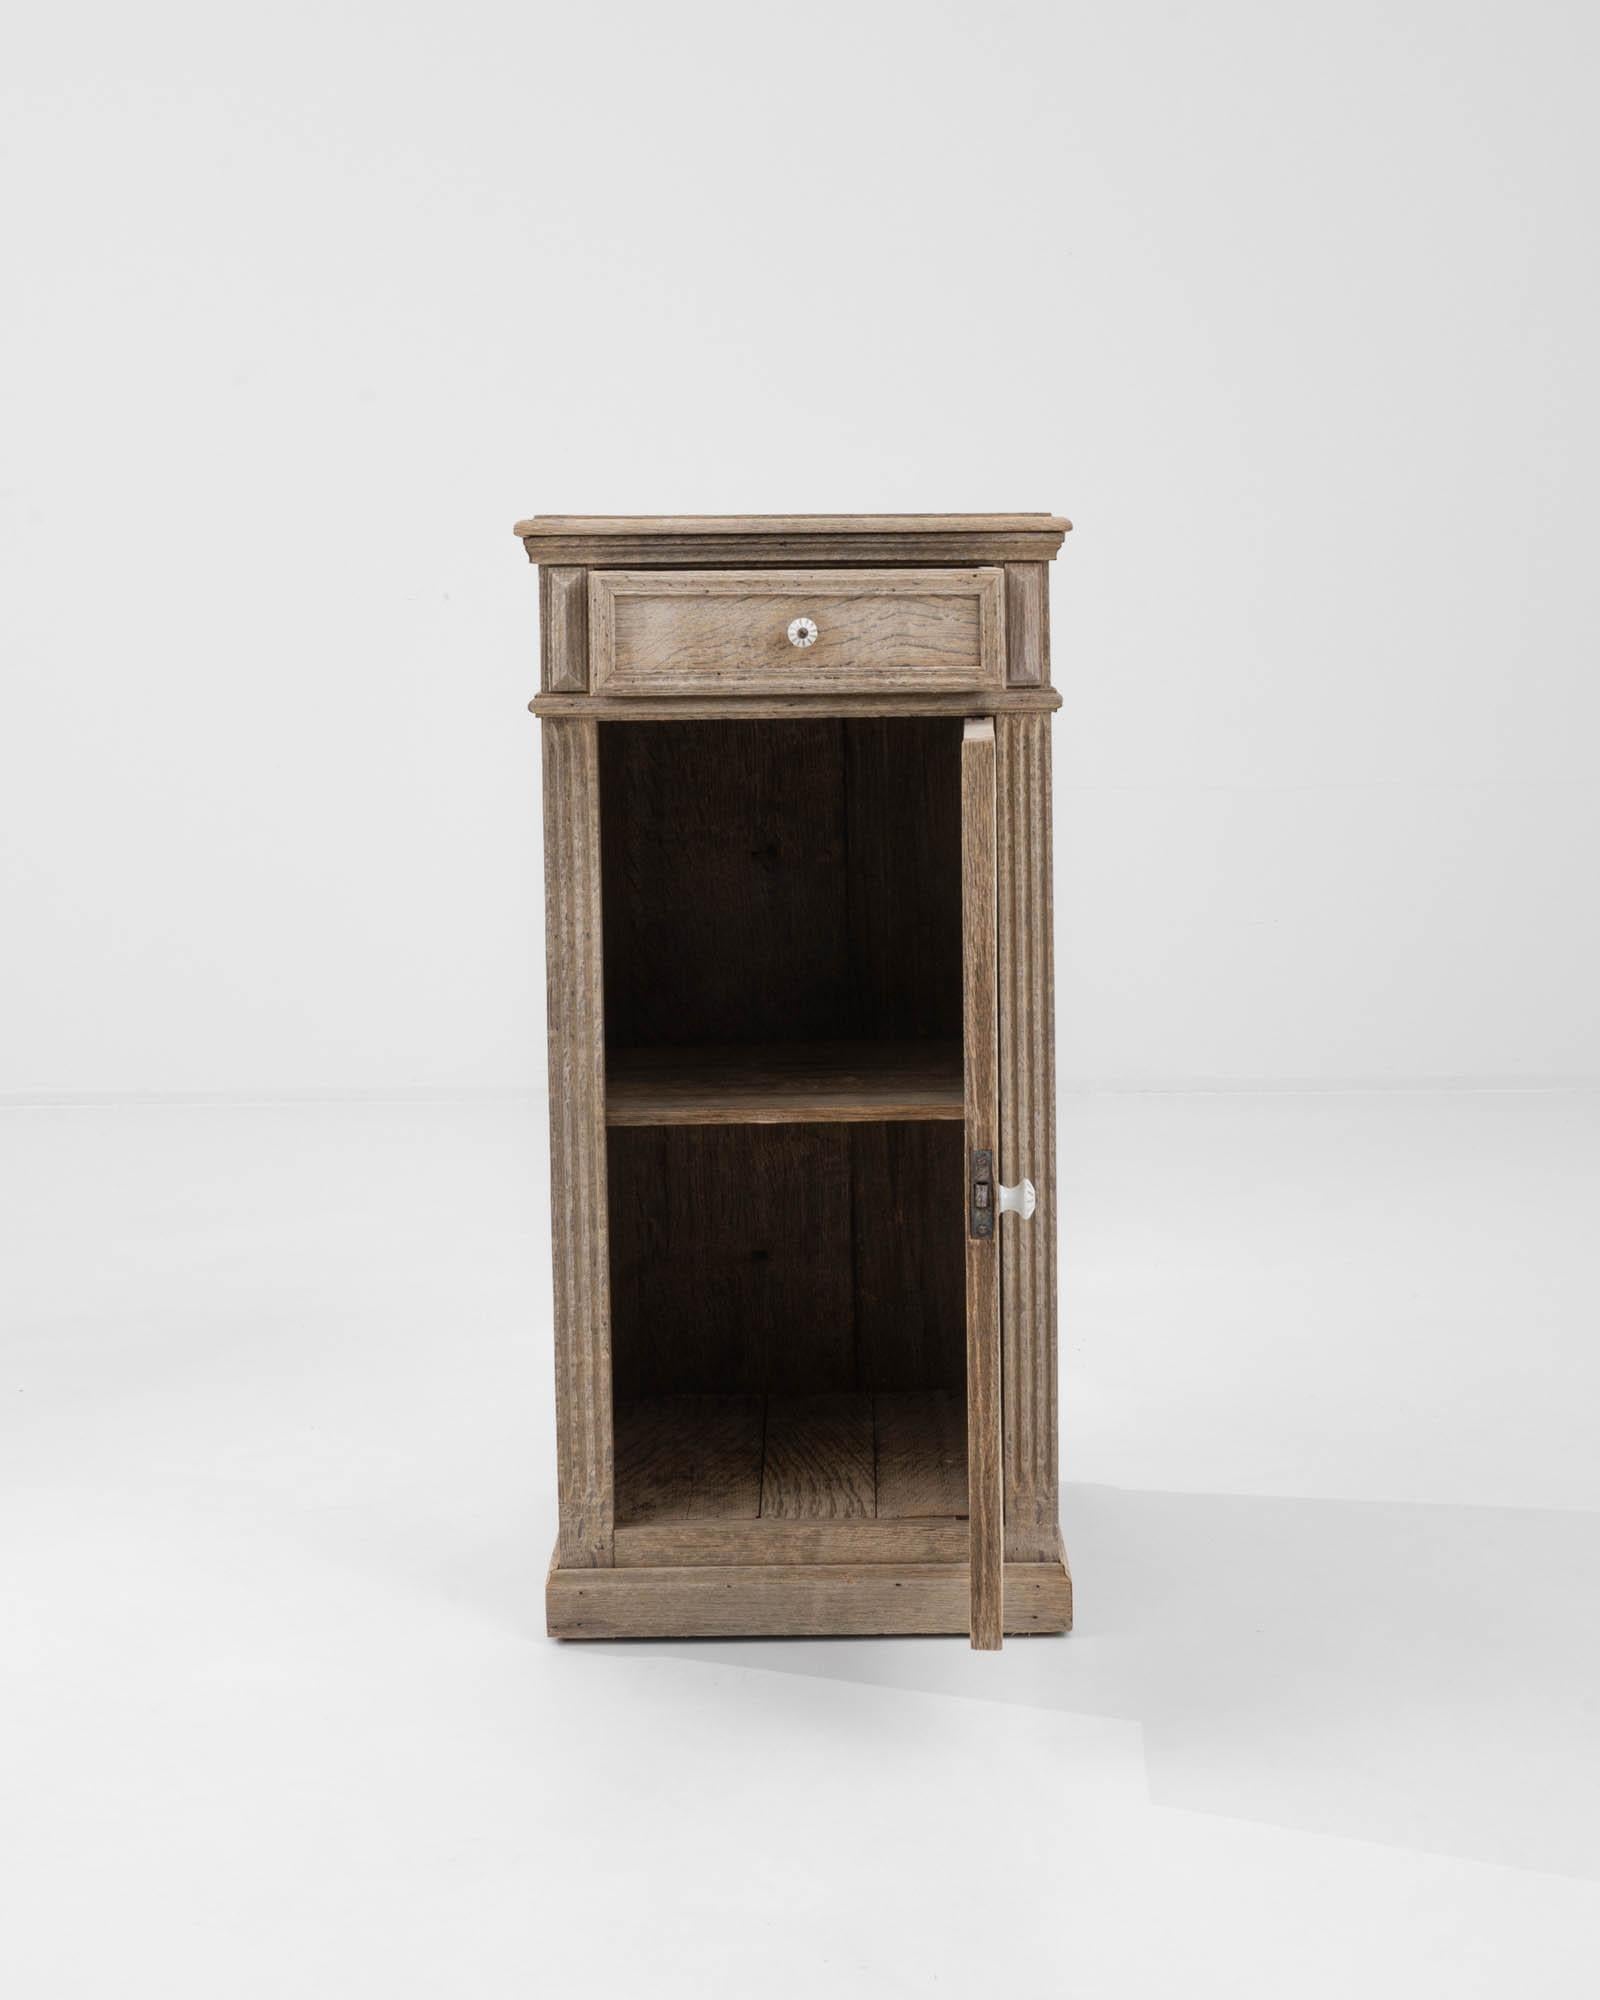 This is a 1900s Belgian Bleached Oak Bedside table that exudes antique charm and simplicity. The pale, sun-kissed finish accentuates the natural wood grain, giving this piece an airy feel that would brighten any bedroom. Its compact design features